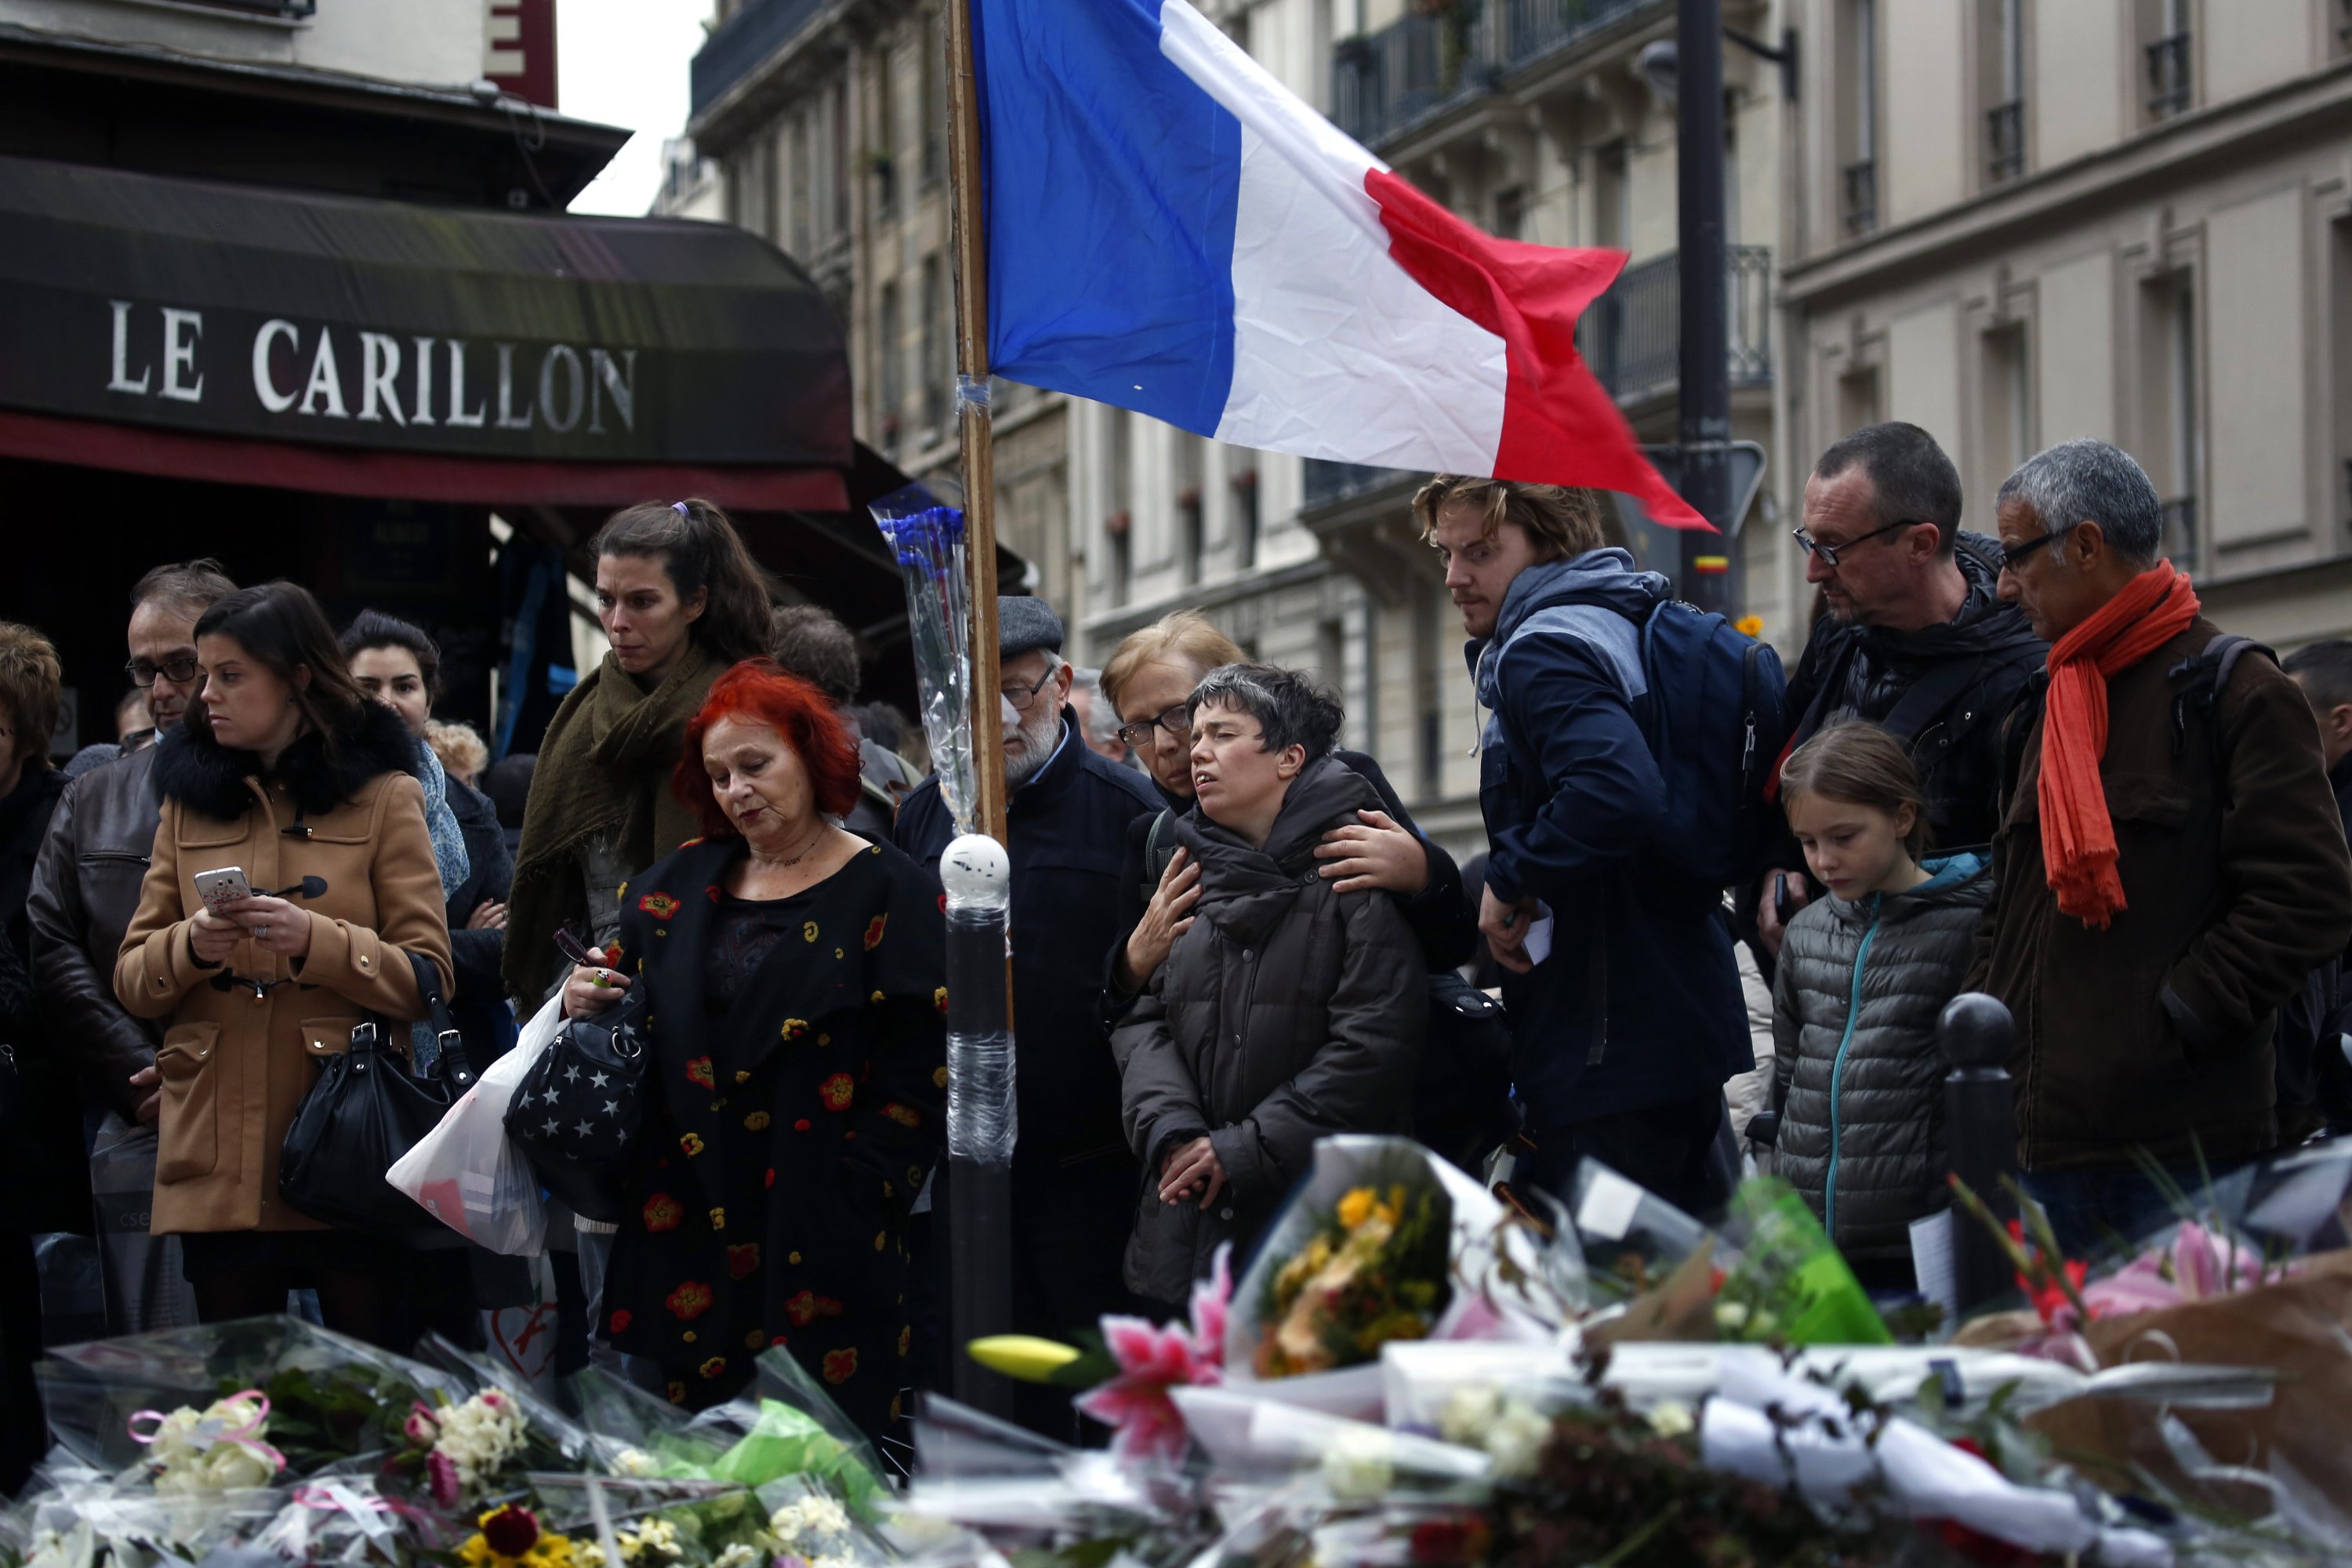 People gather in front of Le Carillon cafe, a site of the attacks, in Paris, France, Nov. 16, 2015. (AP Photo)